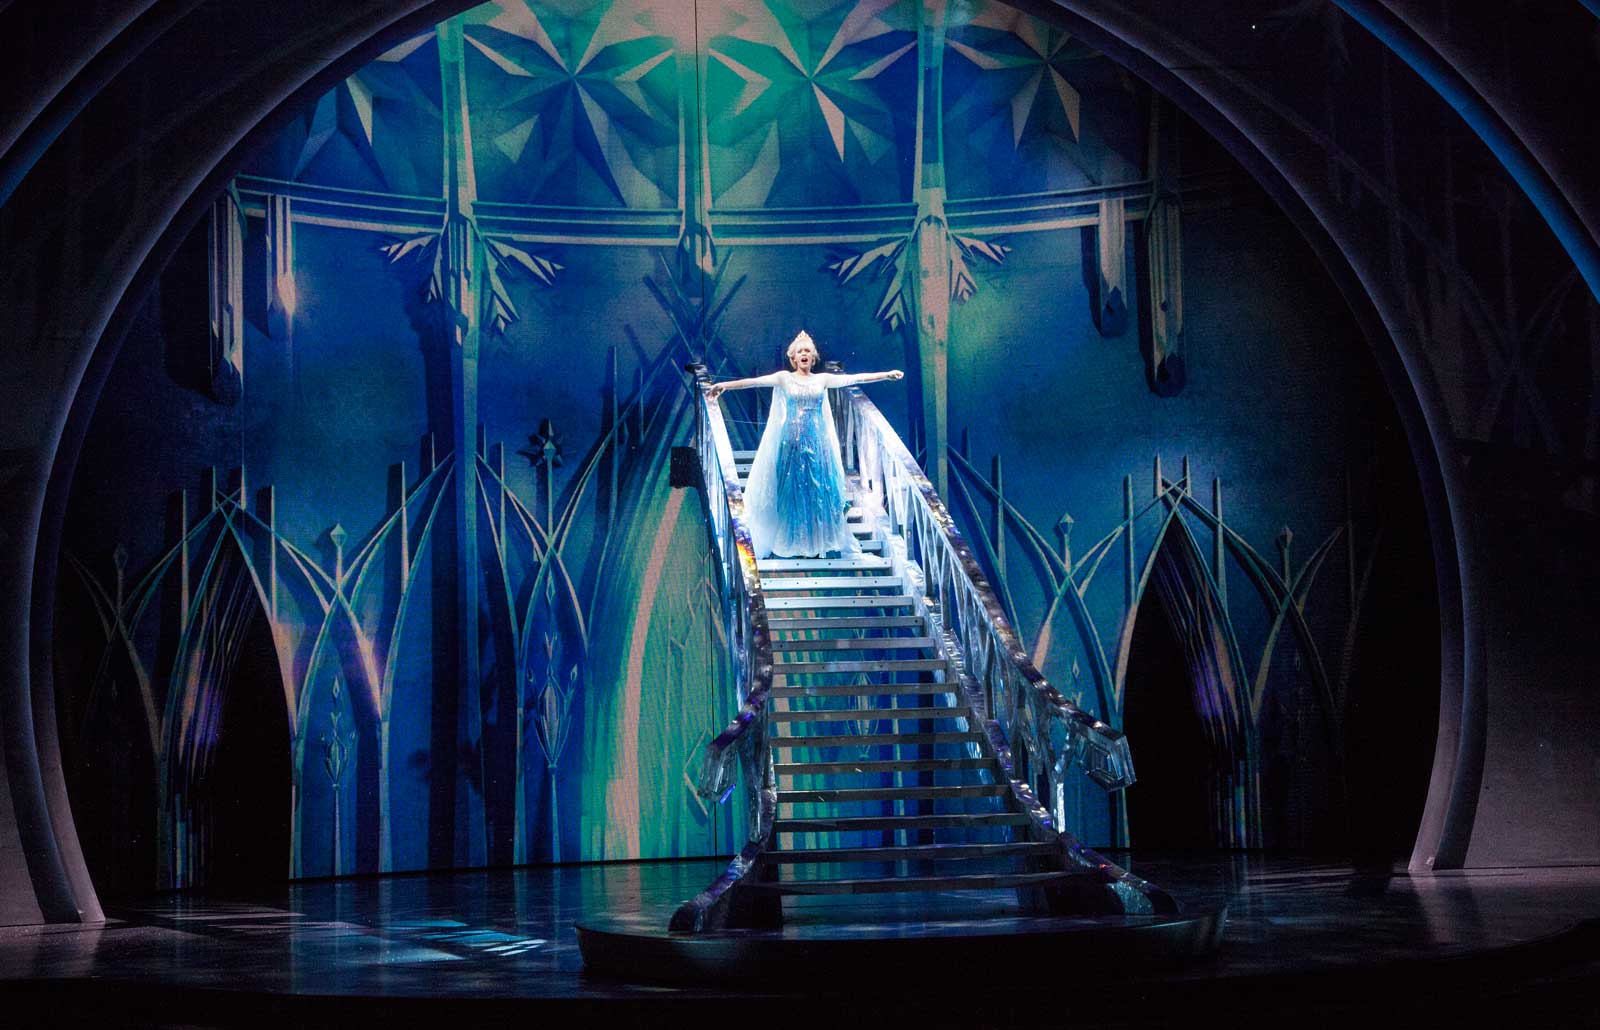 ELSA IN 'FROZEN - LIVE AT THE HYPERION' -- A new theatrical interpretation for the stage based on Disney's animated blockbuster film, Frozen is now playing at the Hyperion Theater at Disney California Adventure Park. The show immerses audiences in the emotional journey of Anna and Elsa with all of the excitement of live theater, including elaborate costumes and sets, stunning special effects and show-stopping production numbers. (Scott Brinegar/Disneyland Resort)